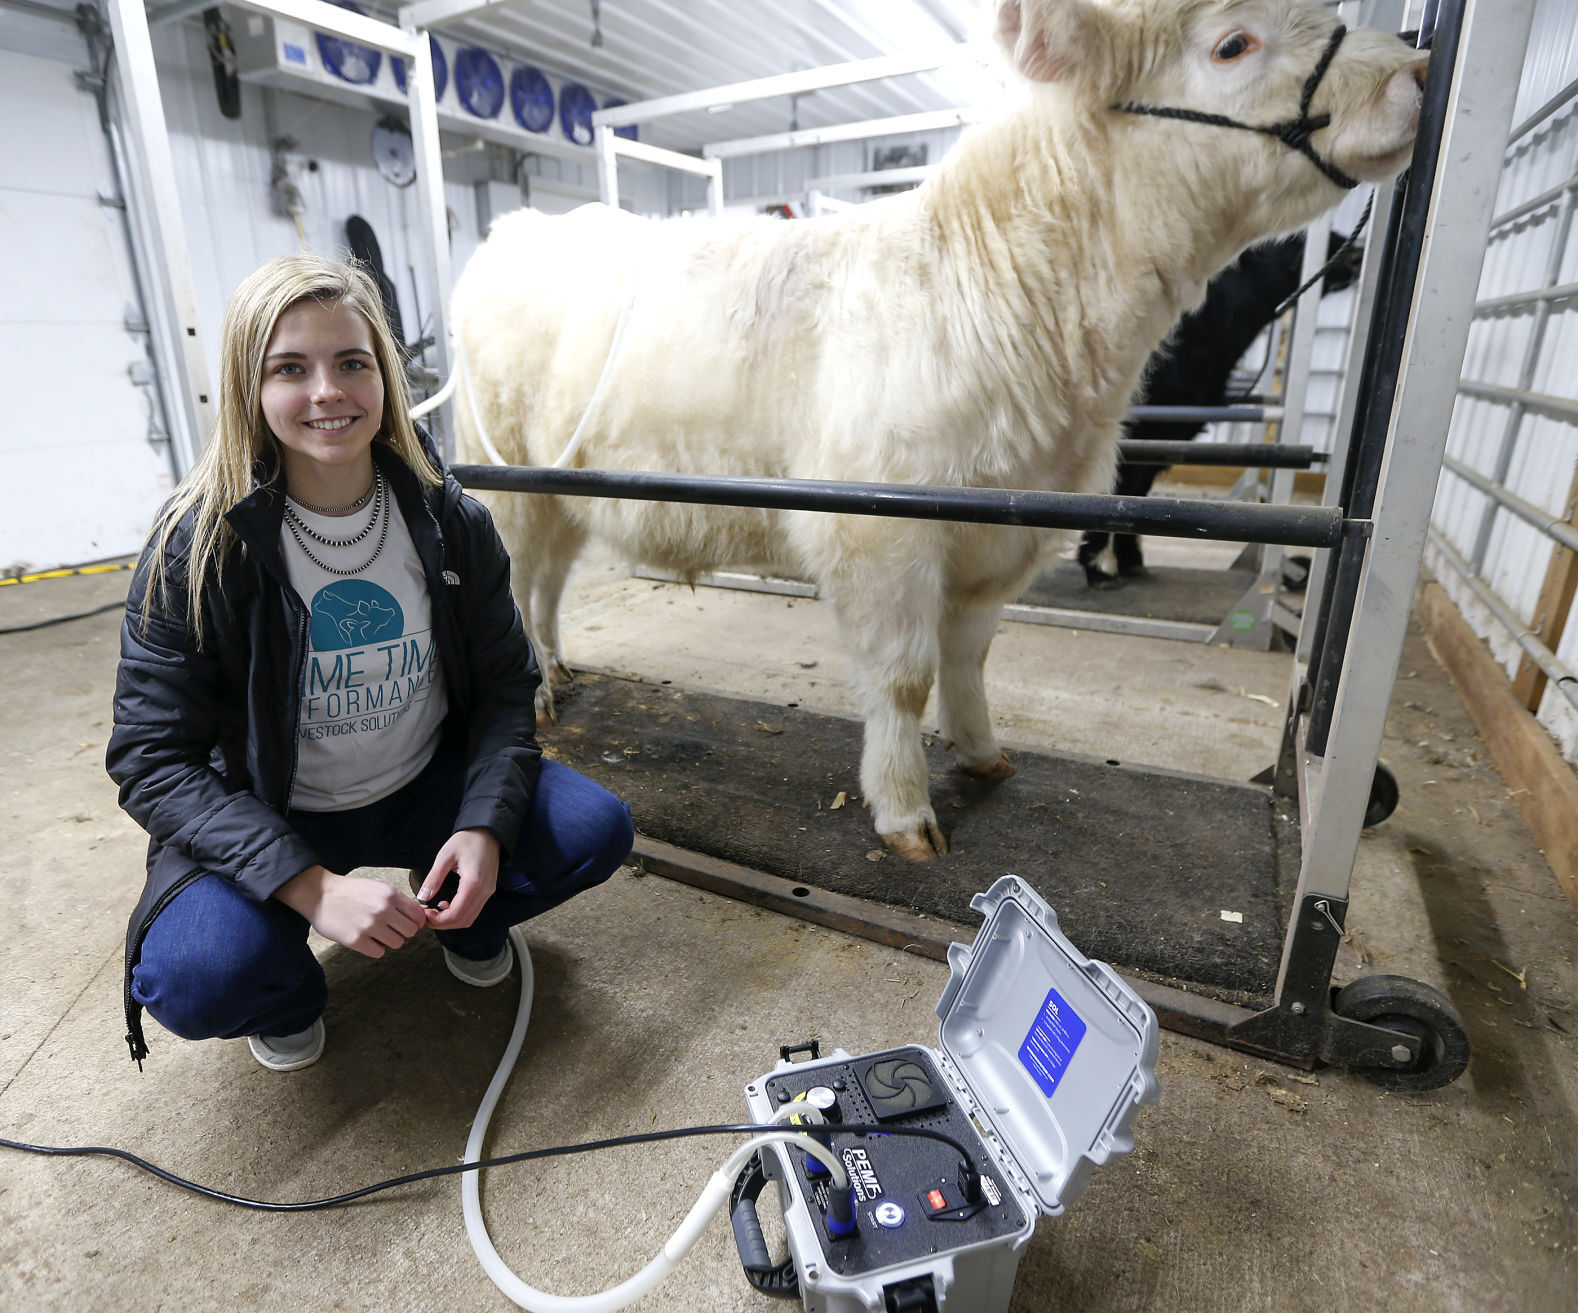 Shullsburg (Wis.) High School senior Madison Russell will showcase her pulsed electromagnetic field therapy business for animals in front of a panel of celebrity judges to compete for a $10,000 scholarship. PHOTO CREDIT: Dave Kettering